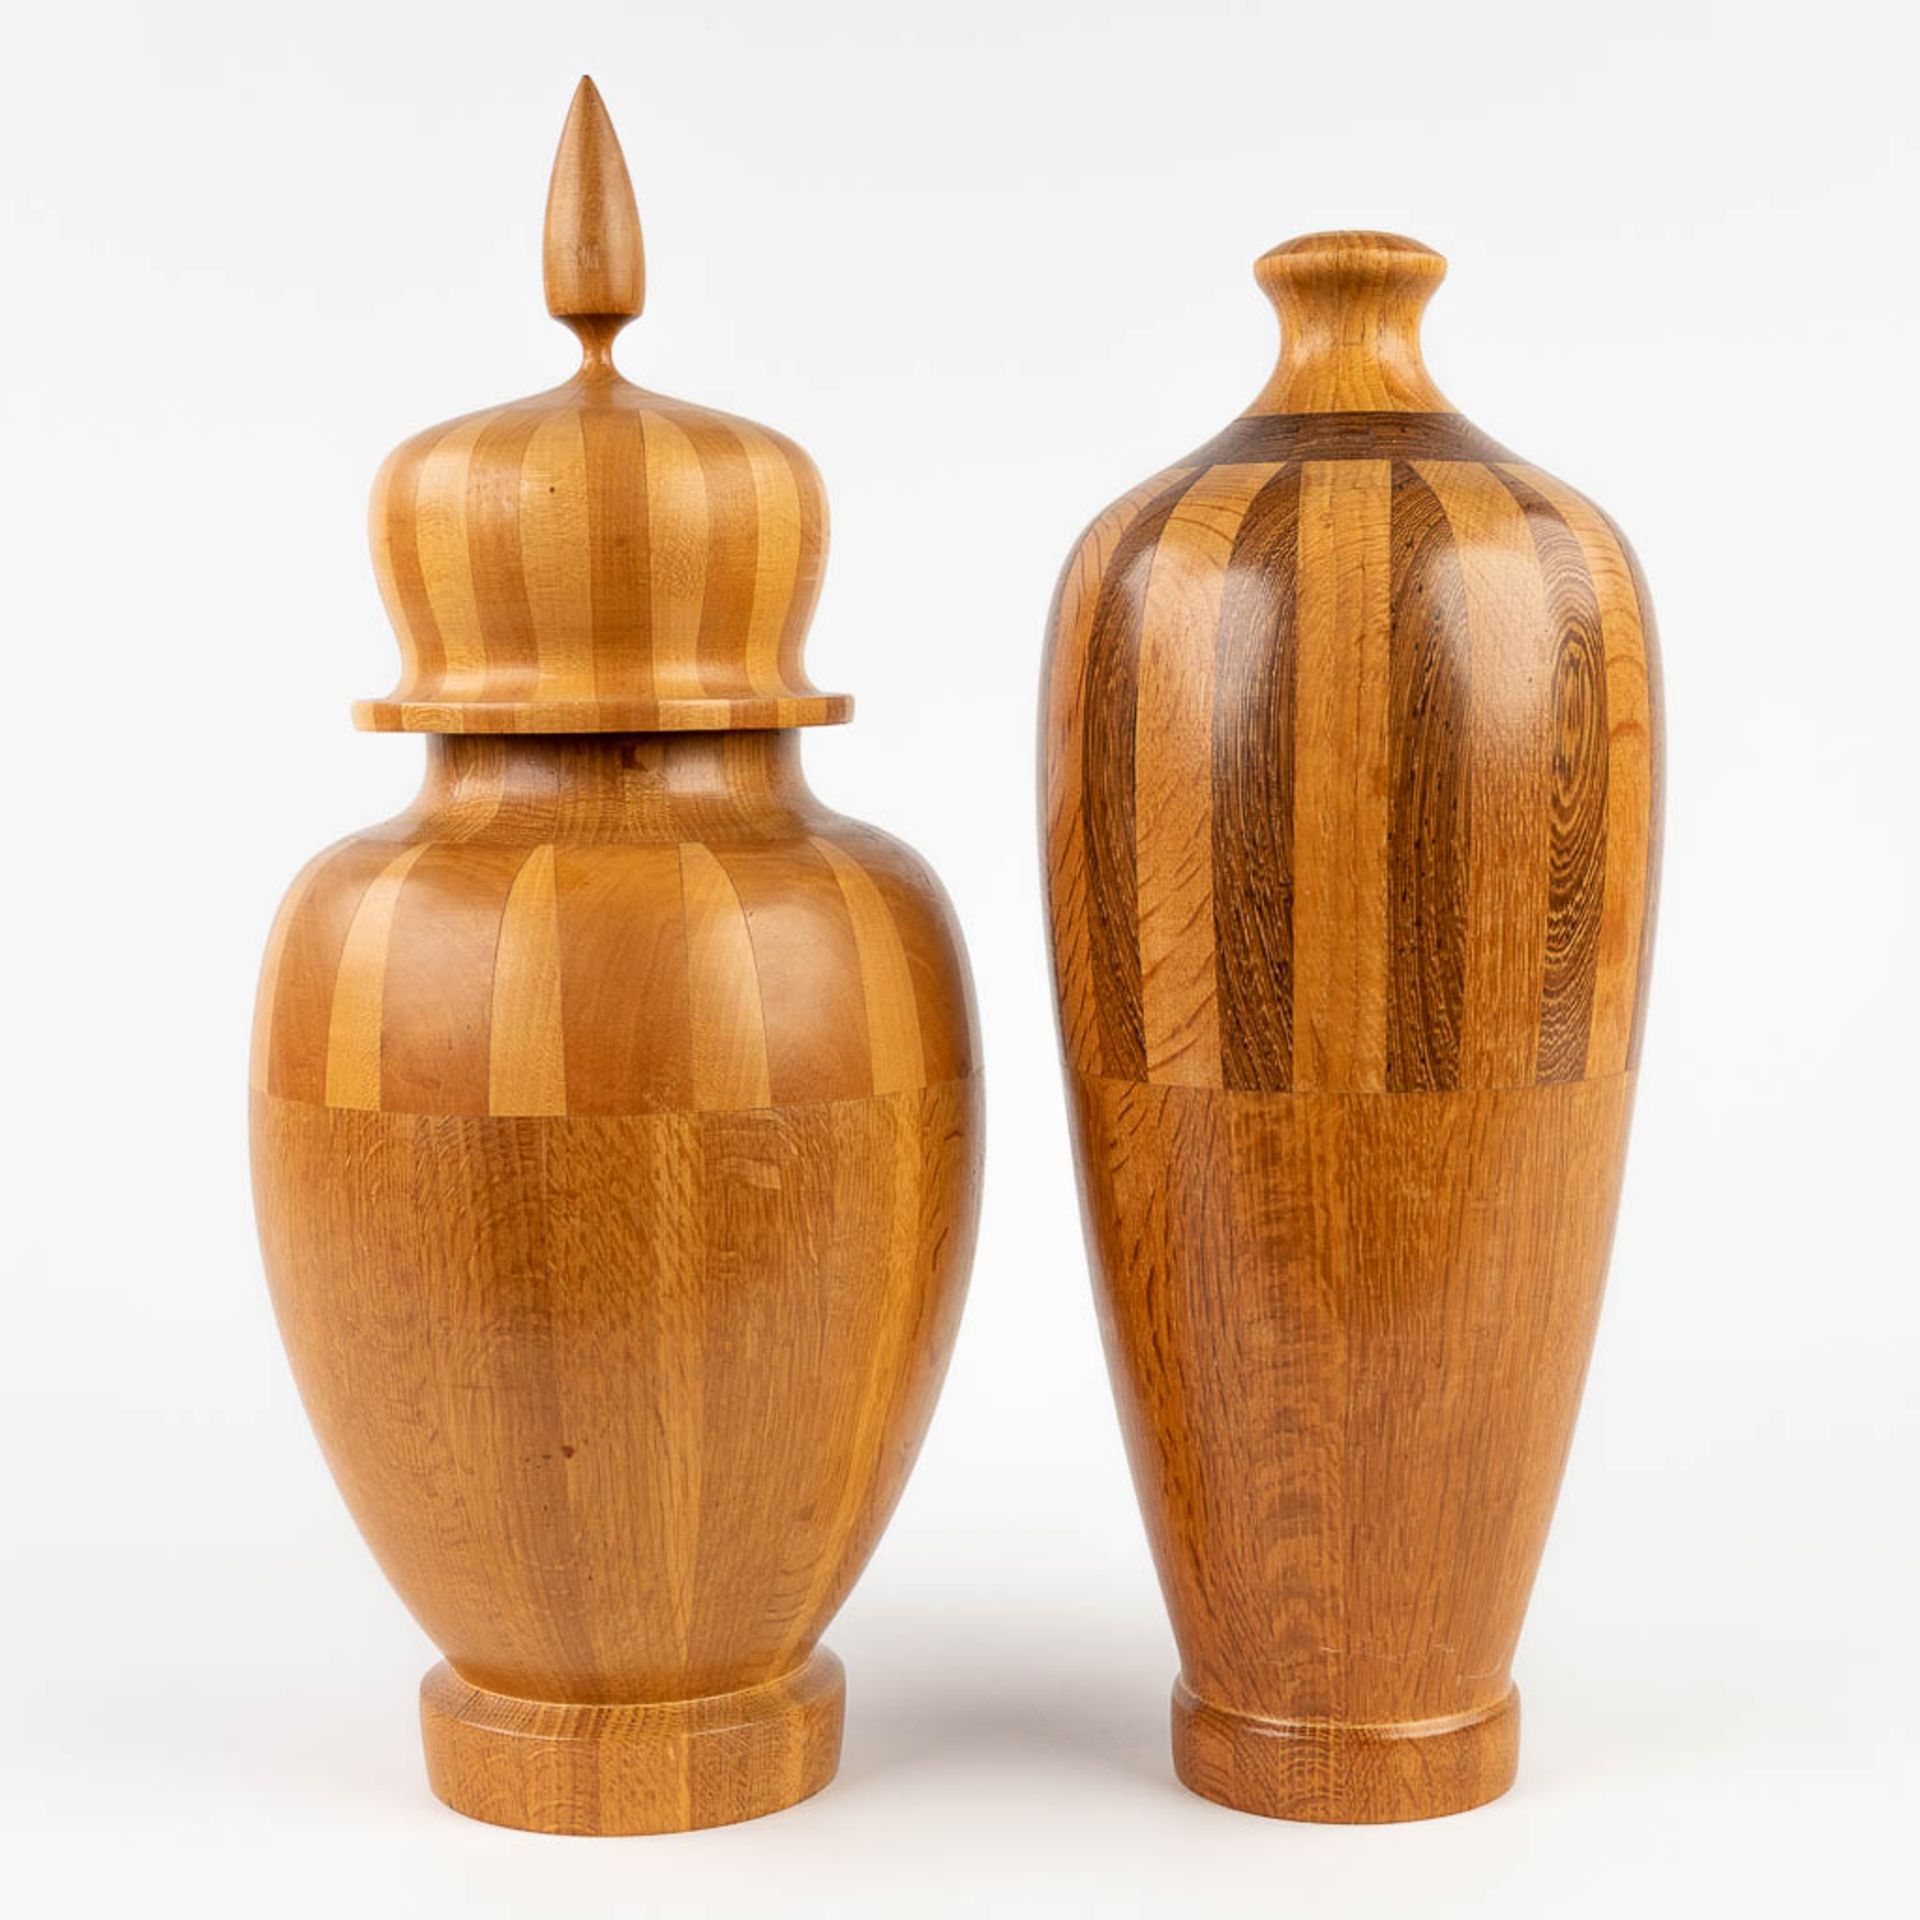 A collection of 2 wood-turned vases, made of wood. circa 1960. (H: 43 x D: 16 cm) - Image 6 of 11